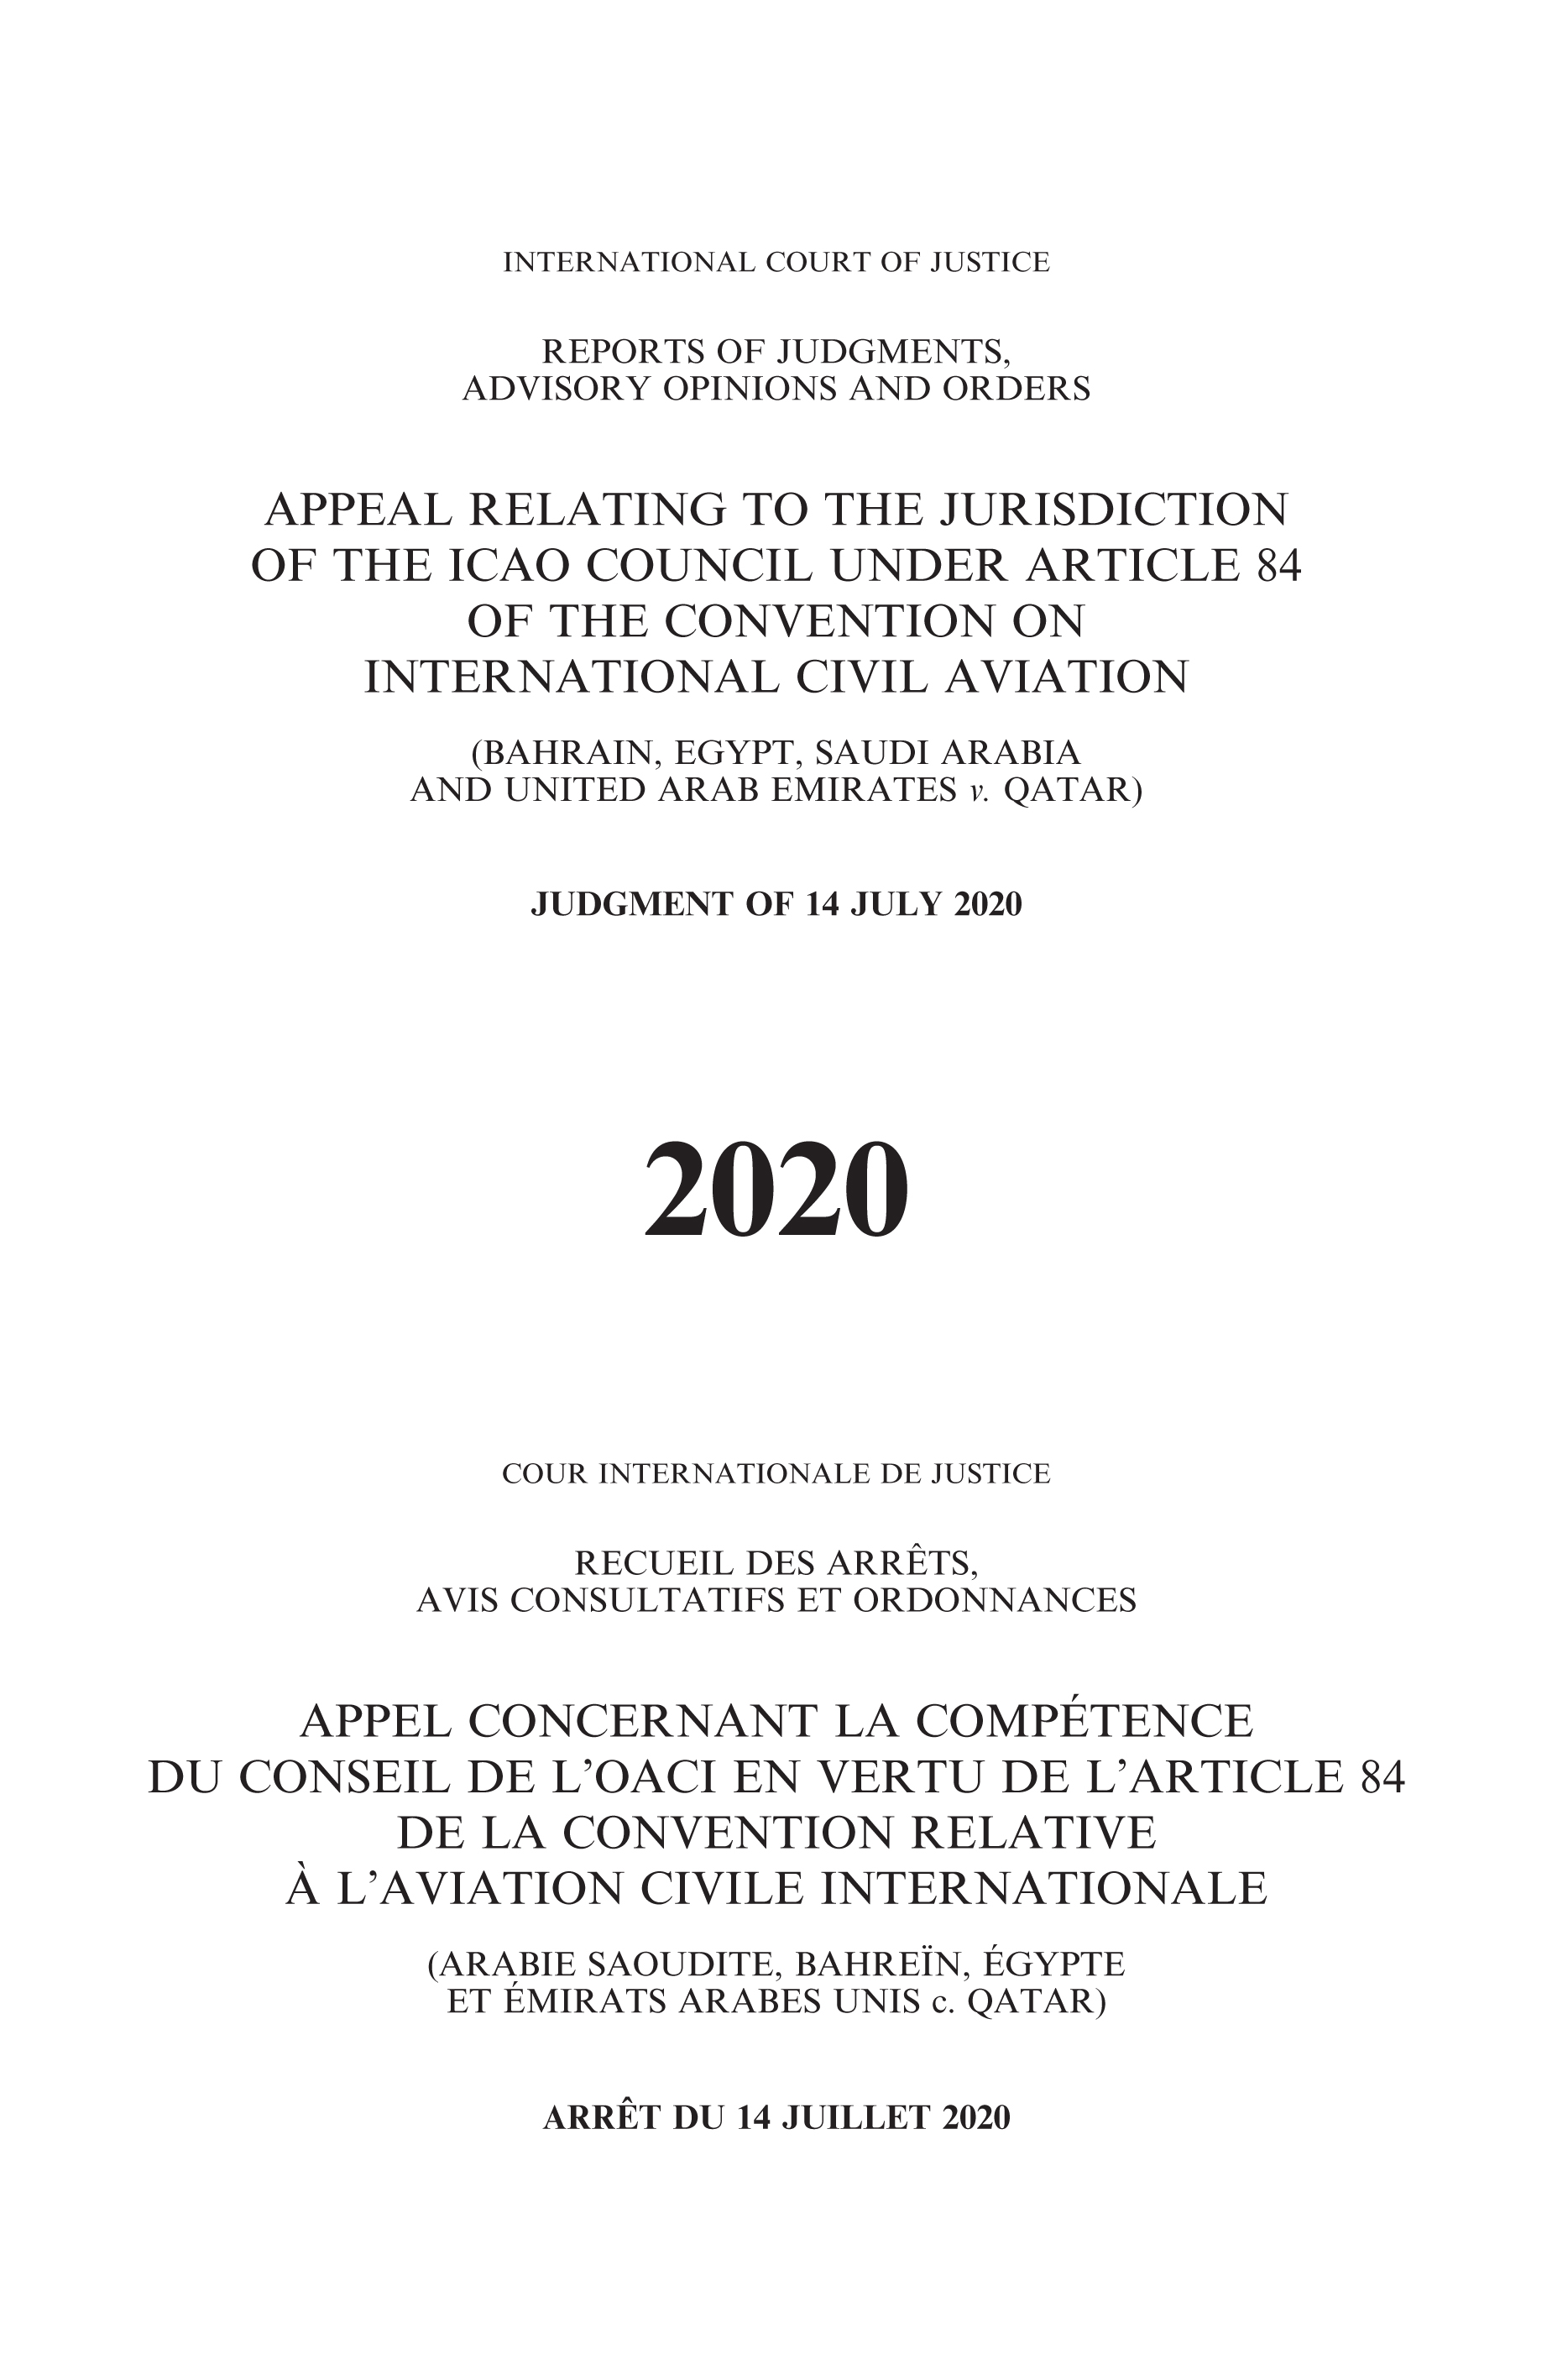 image of Reports of Judgments, Advisory Opinions and Orders 2020: Appeal relating to the Jurisdiction of the ICAO Council under Article 84 of the Convention on International Civil Aviation (Bahrain, Egypt, Saudi Arabia and United Arab Emirates v. Qatar)